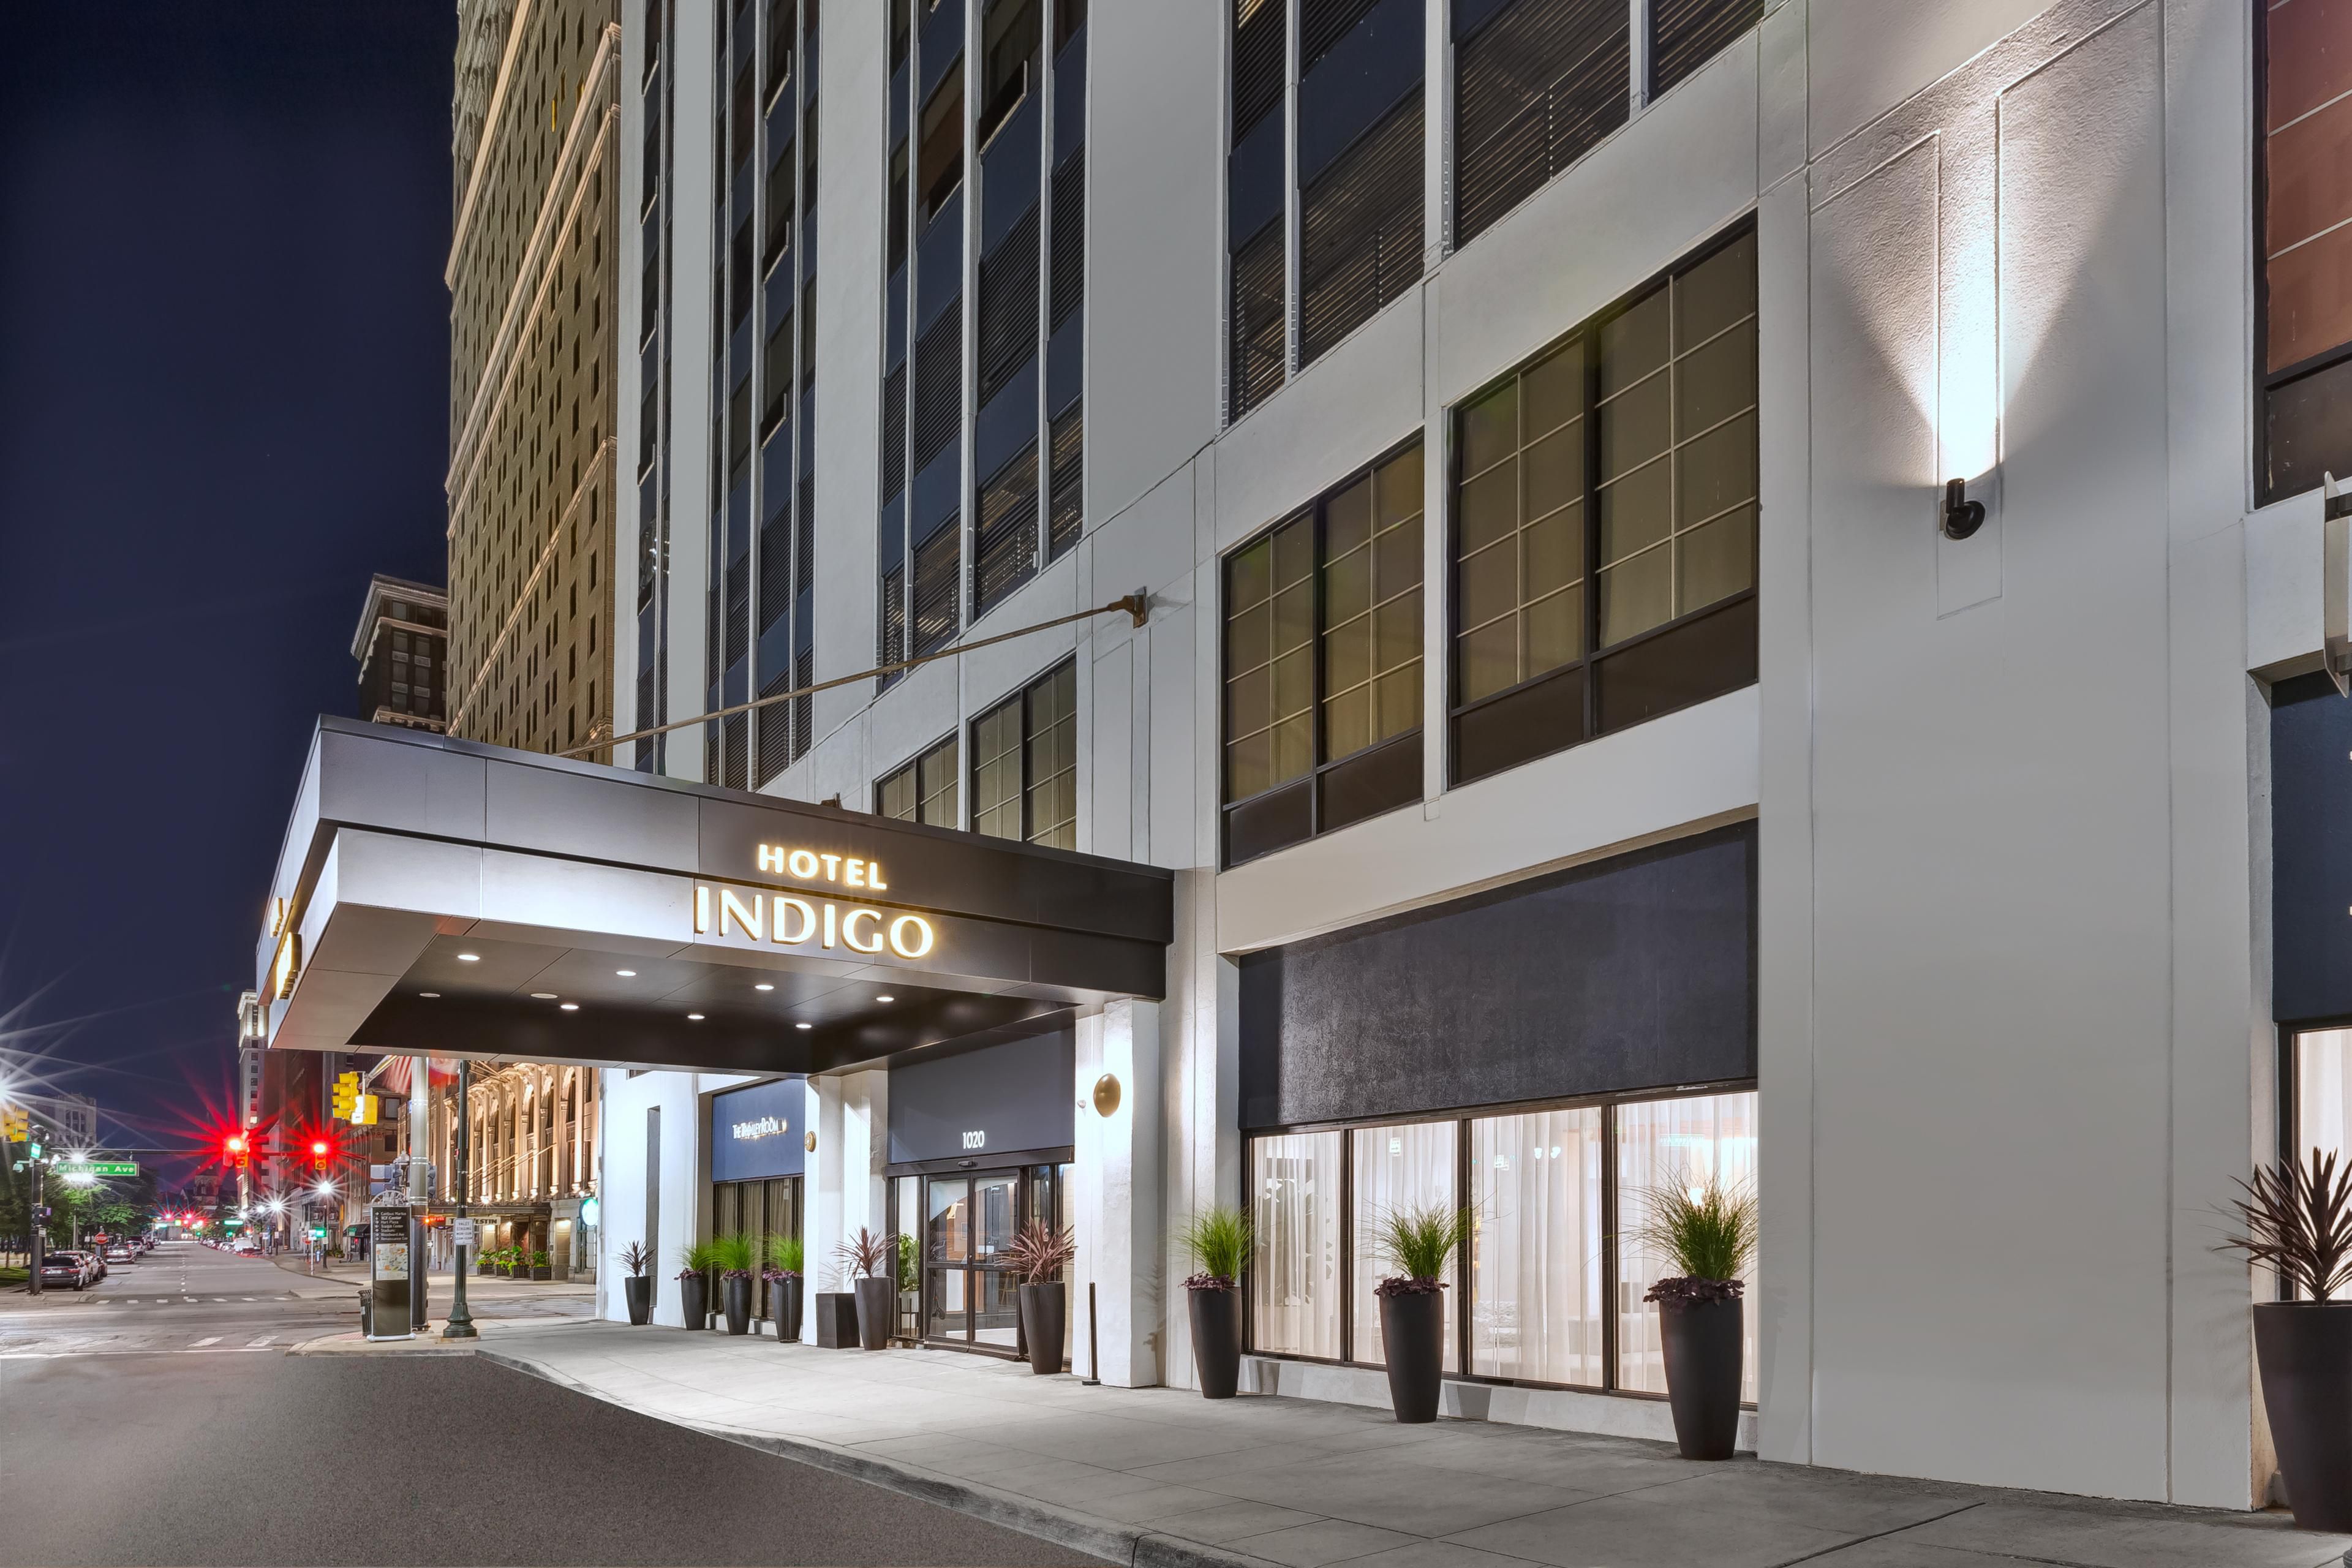 Our hotel sits within walking distance of all major Detroit sports arenas, including the Red Wings, Tigers, Pistons, and Lions' stadiums. Catch a concert at the Fox Theatre, explore the Detroit Institute of Art, and visit the Motown Museum. Our prime location makes it easy to experience downtown Detroit's vibrant pulse.